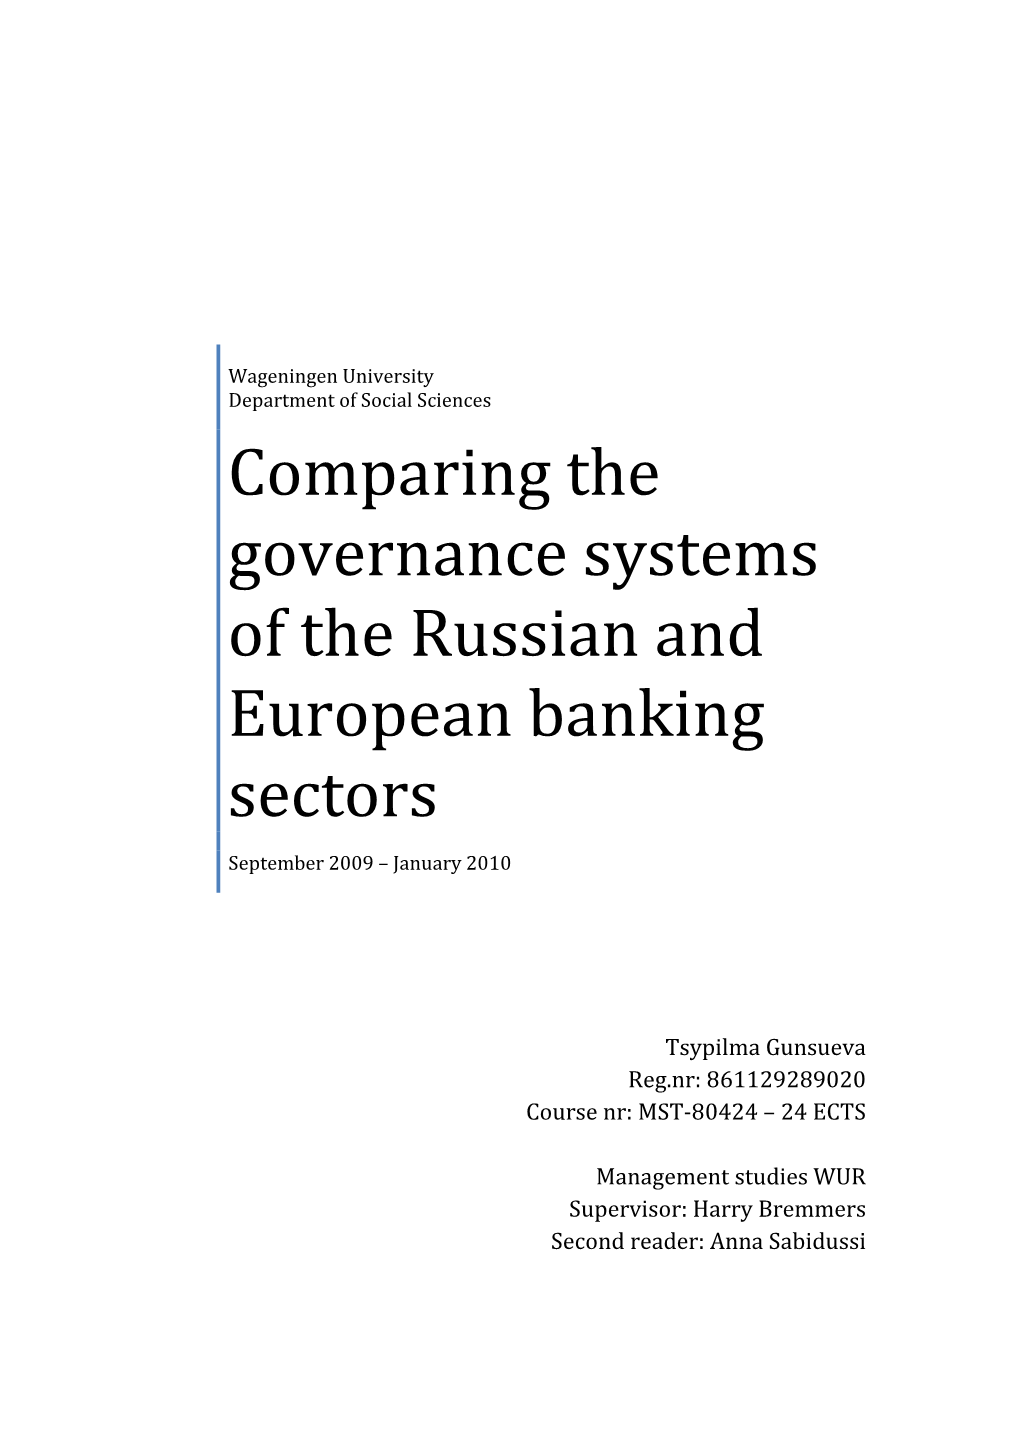 Comparing the Governance Systems of the Russian and European Banking Sectors